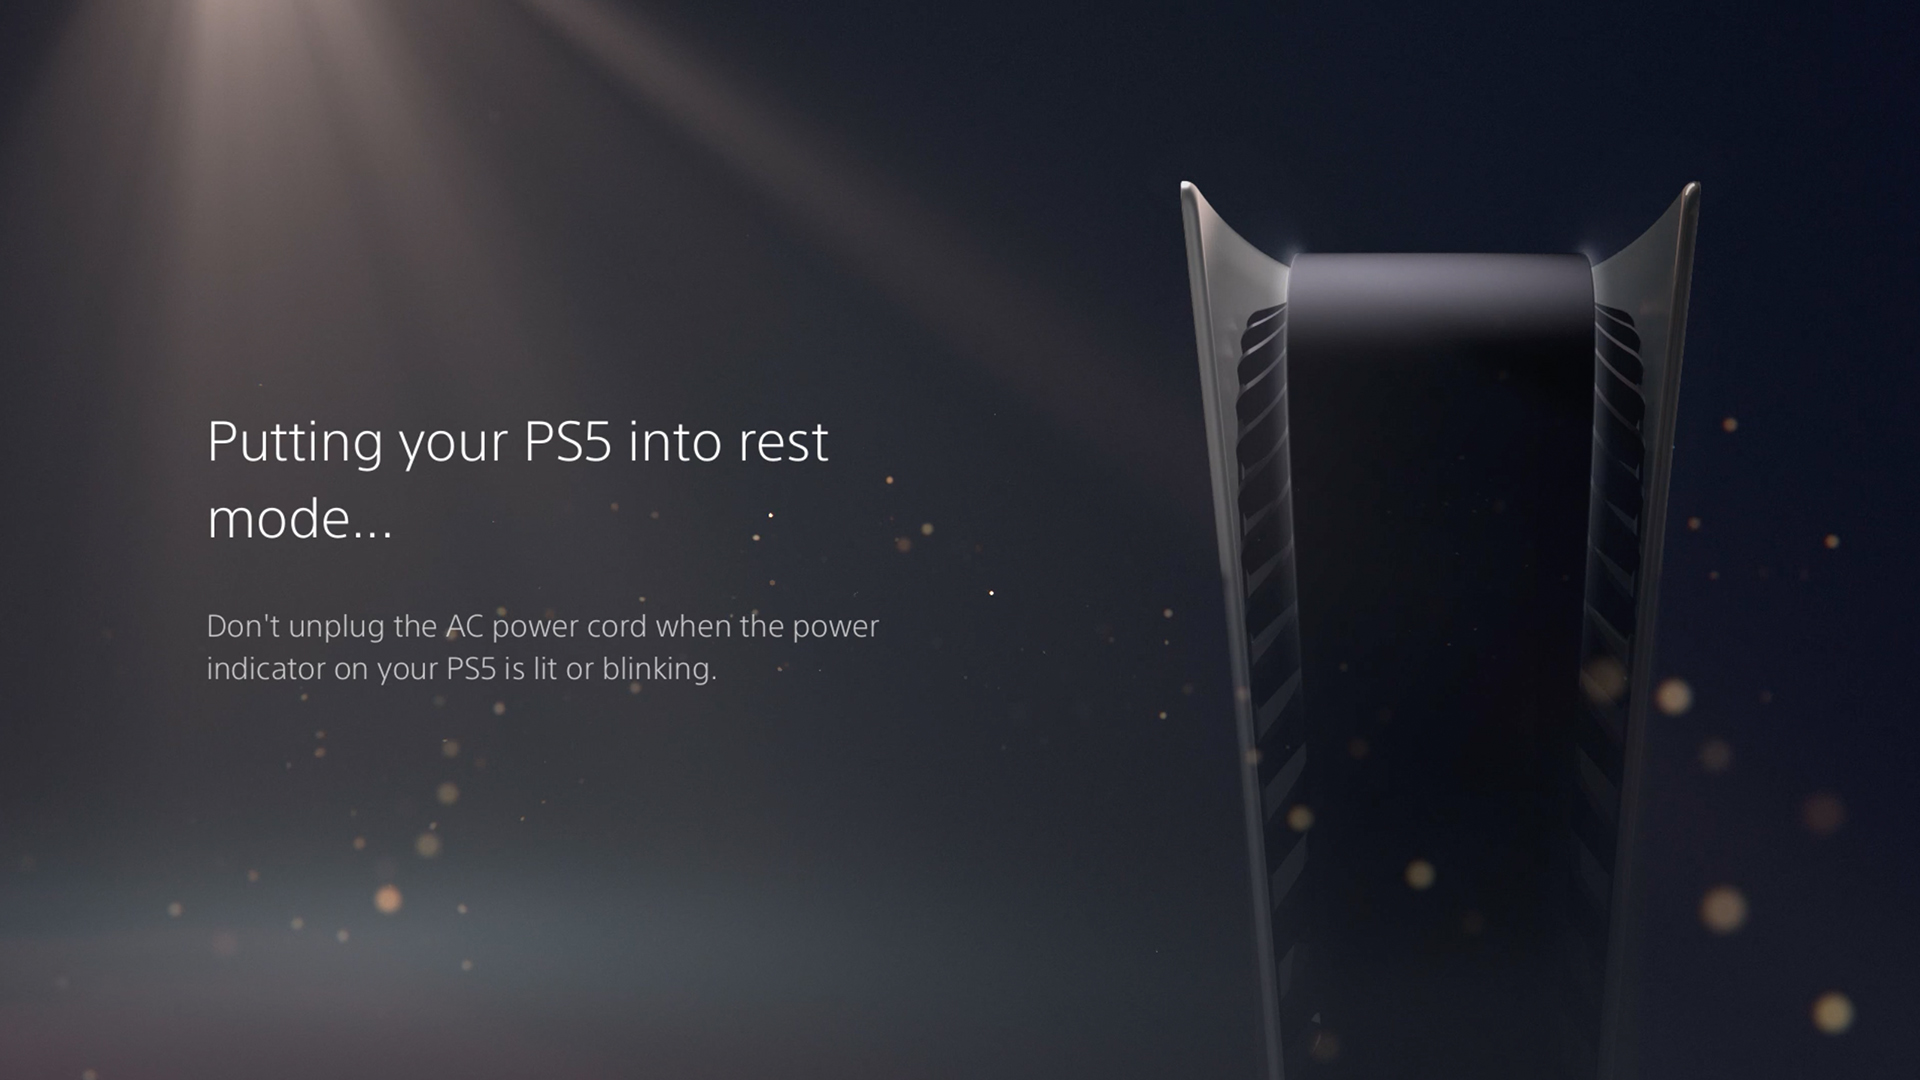 Putting PS5 in rest mode